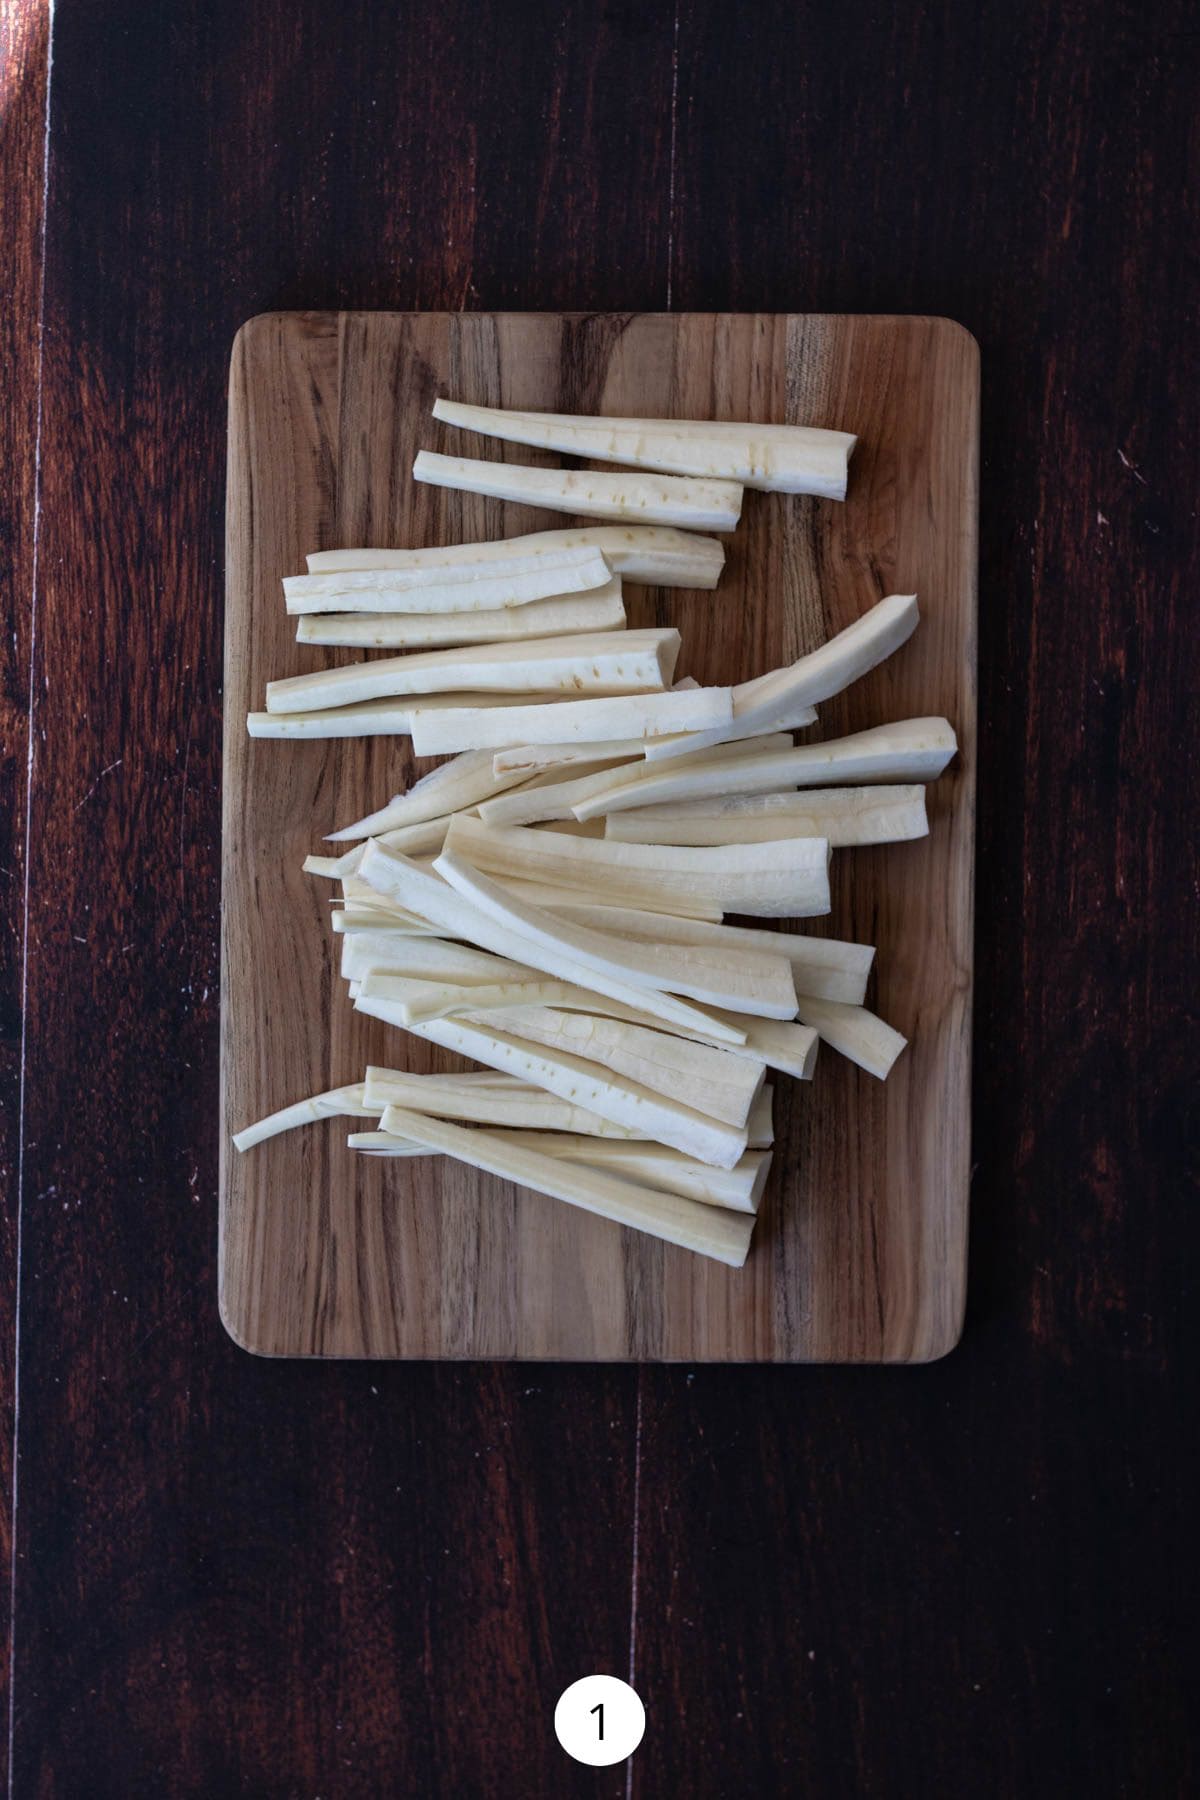 Parsnips cut into sticks on a rectangle wood cutting board.